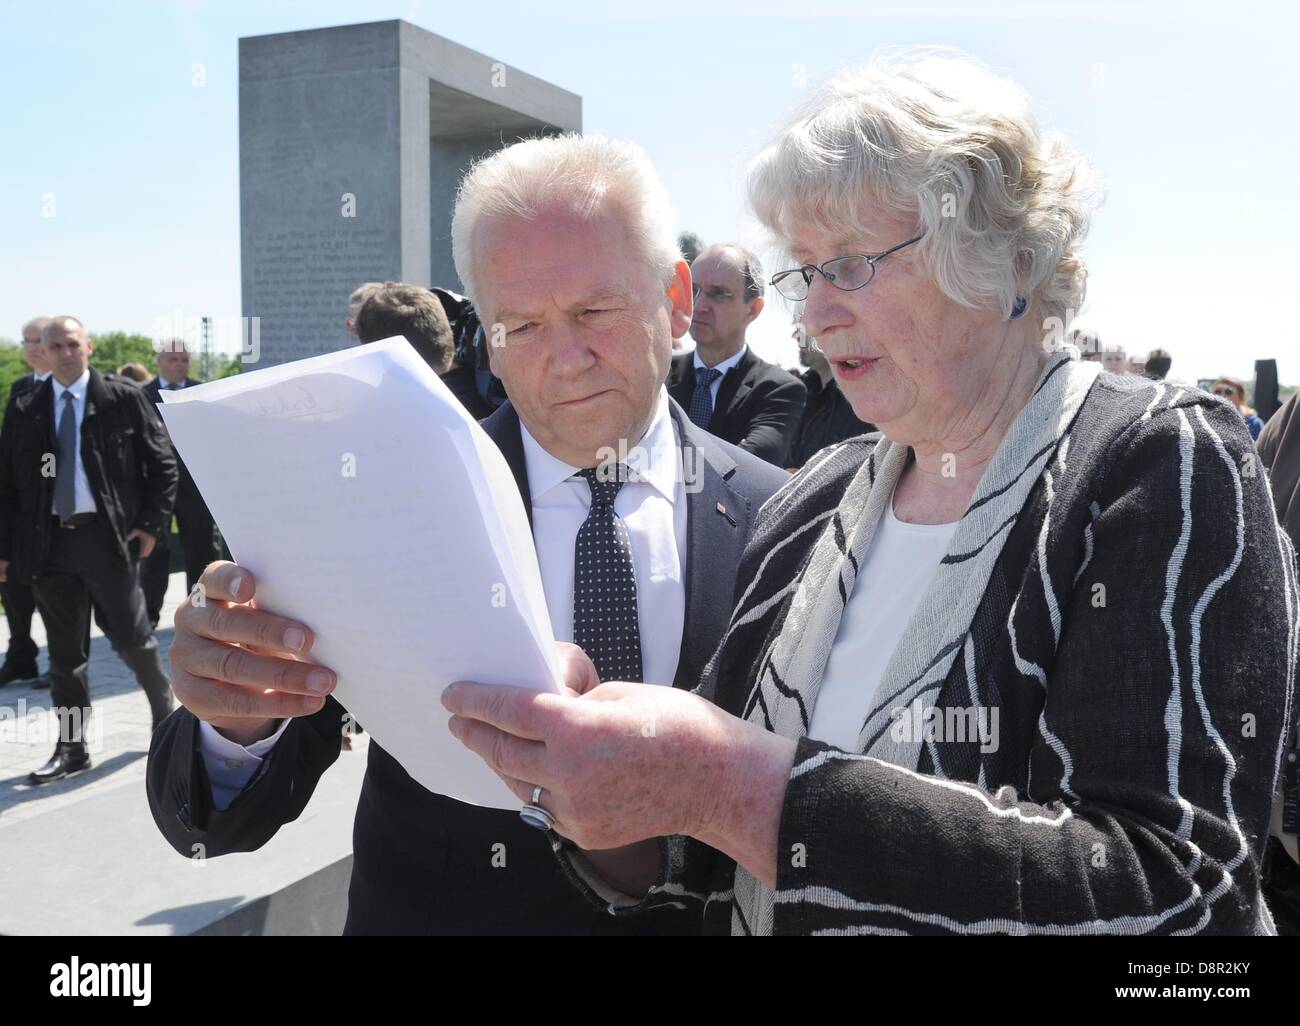 Eschede, Germany. 3rd June 2013. Gisela Angermann and CEO of Deutsche Bahn AG, Ruediger Grube, look at a text during a commemoration ceremony on the occasion of the 15th anniversary of the Eschede train accident in Eschede. Angermann lost a son in the accident. Intercity Express train 'Wilhelm Conrad Roentgen' was derailed because of a faulty wheel on 03 June 1998. 101 people died in the accident. Photo: HOLGER HOLLEMANN/dpa/Alamy Live News Stock Photo